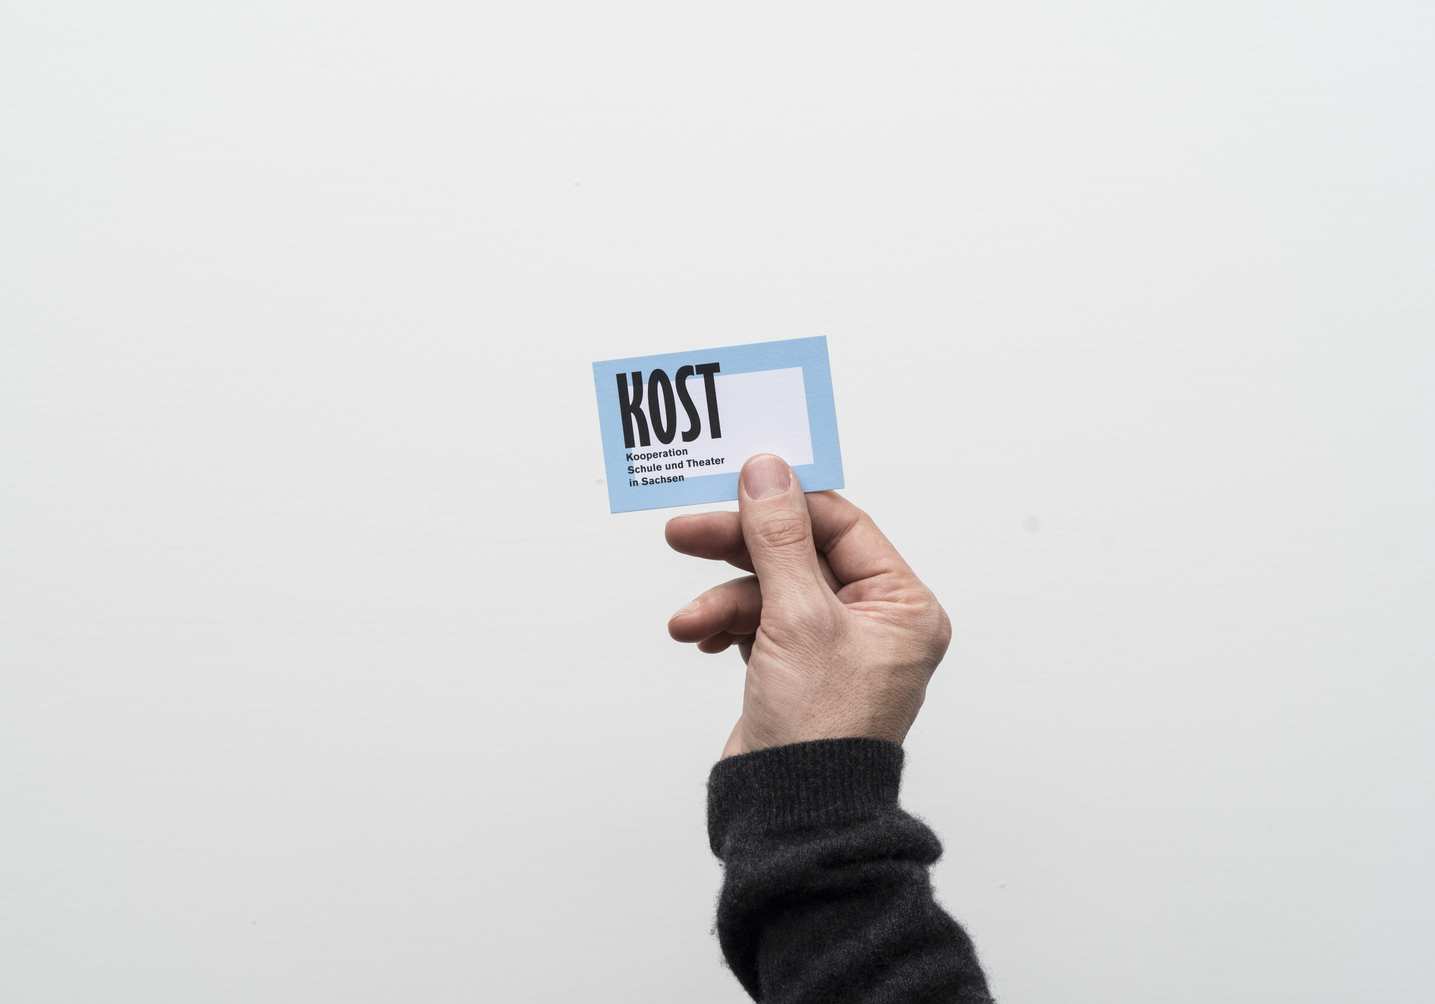 kost-business-card-3-1435x1004px